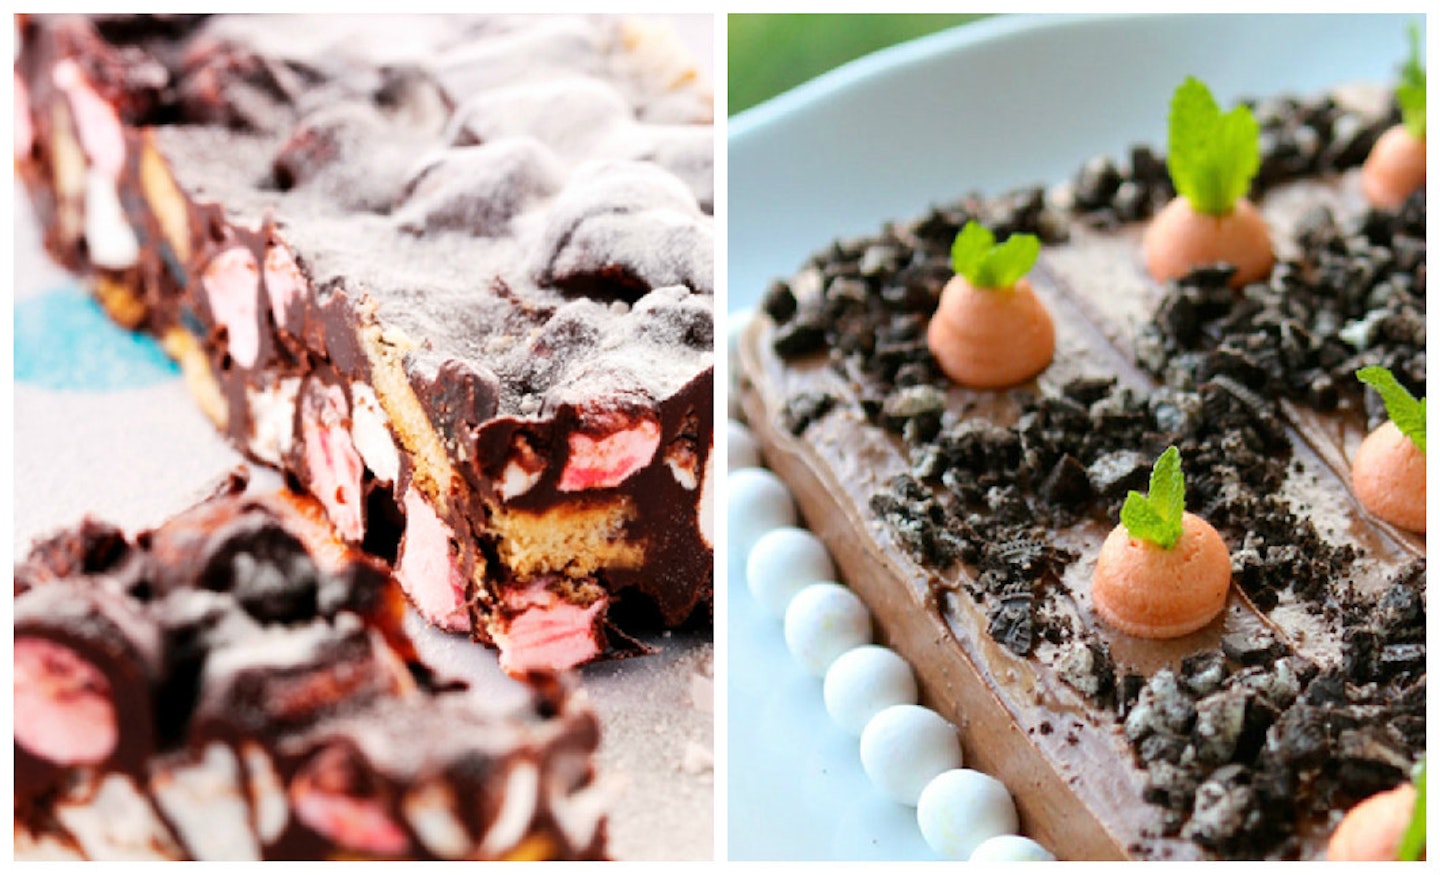 Left: Rocky Road        Right: Carrot Planted Chocolate Cake